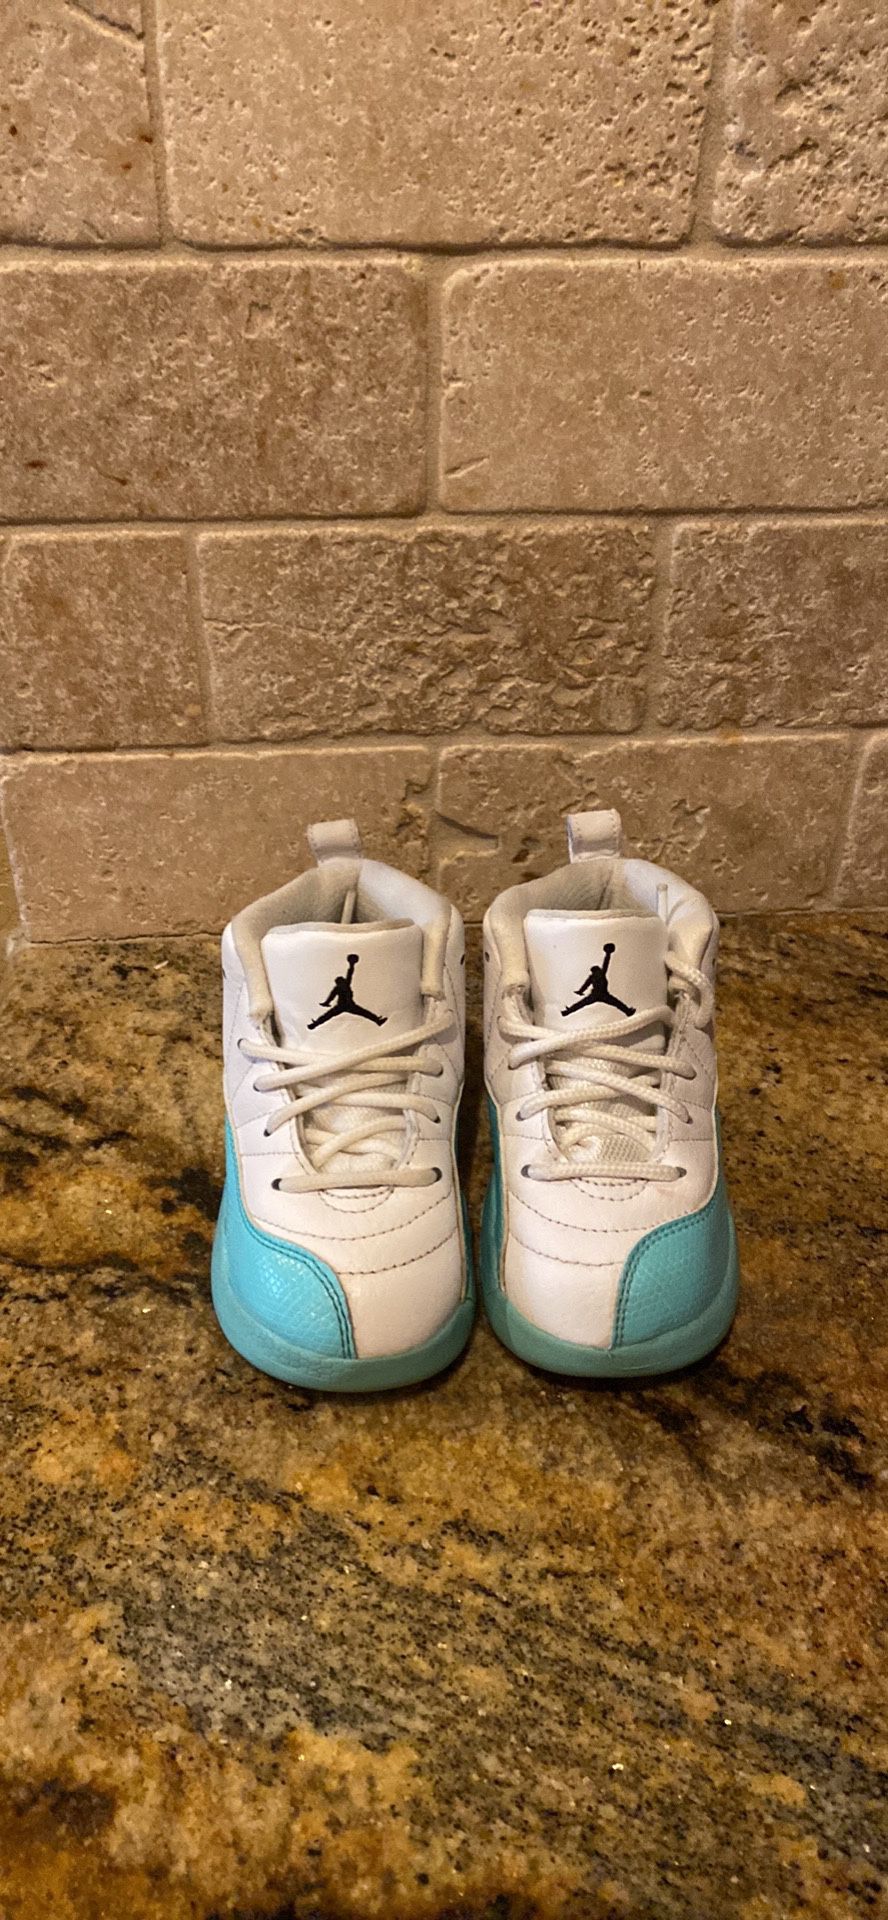 Infant Size 7c Teal And White Nike Air Jordan